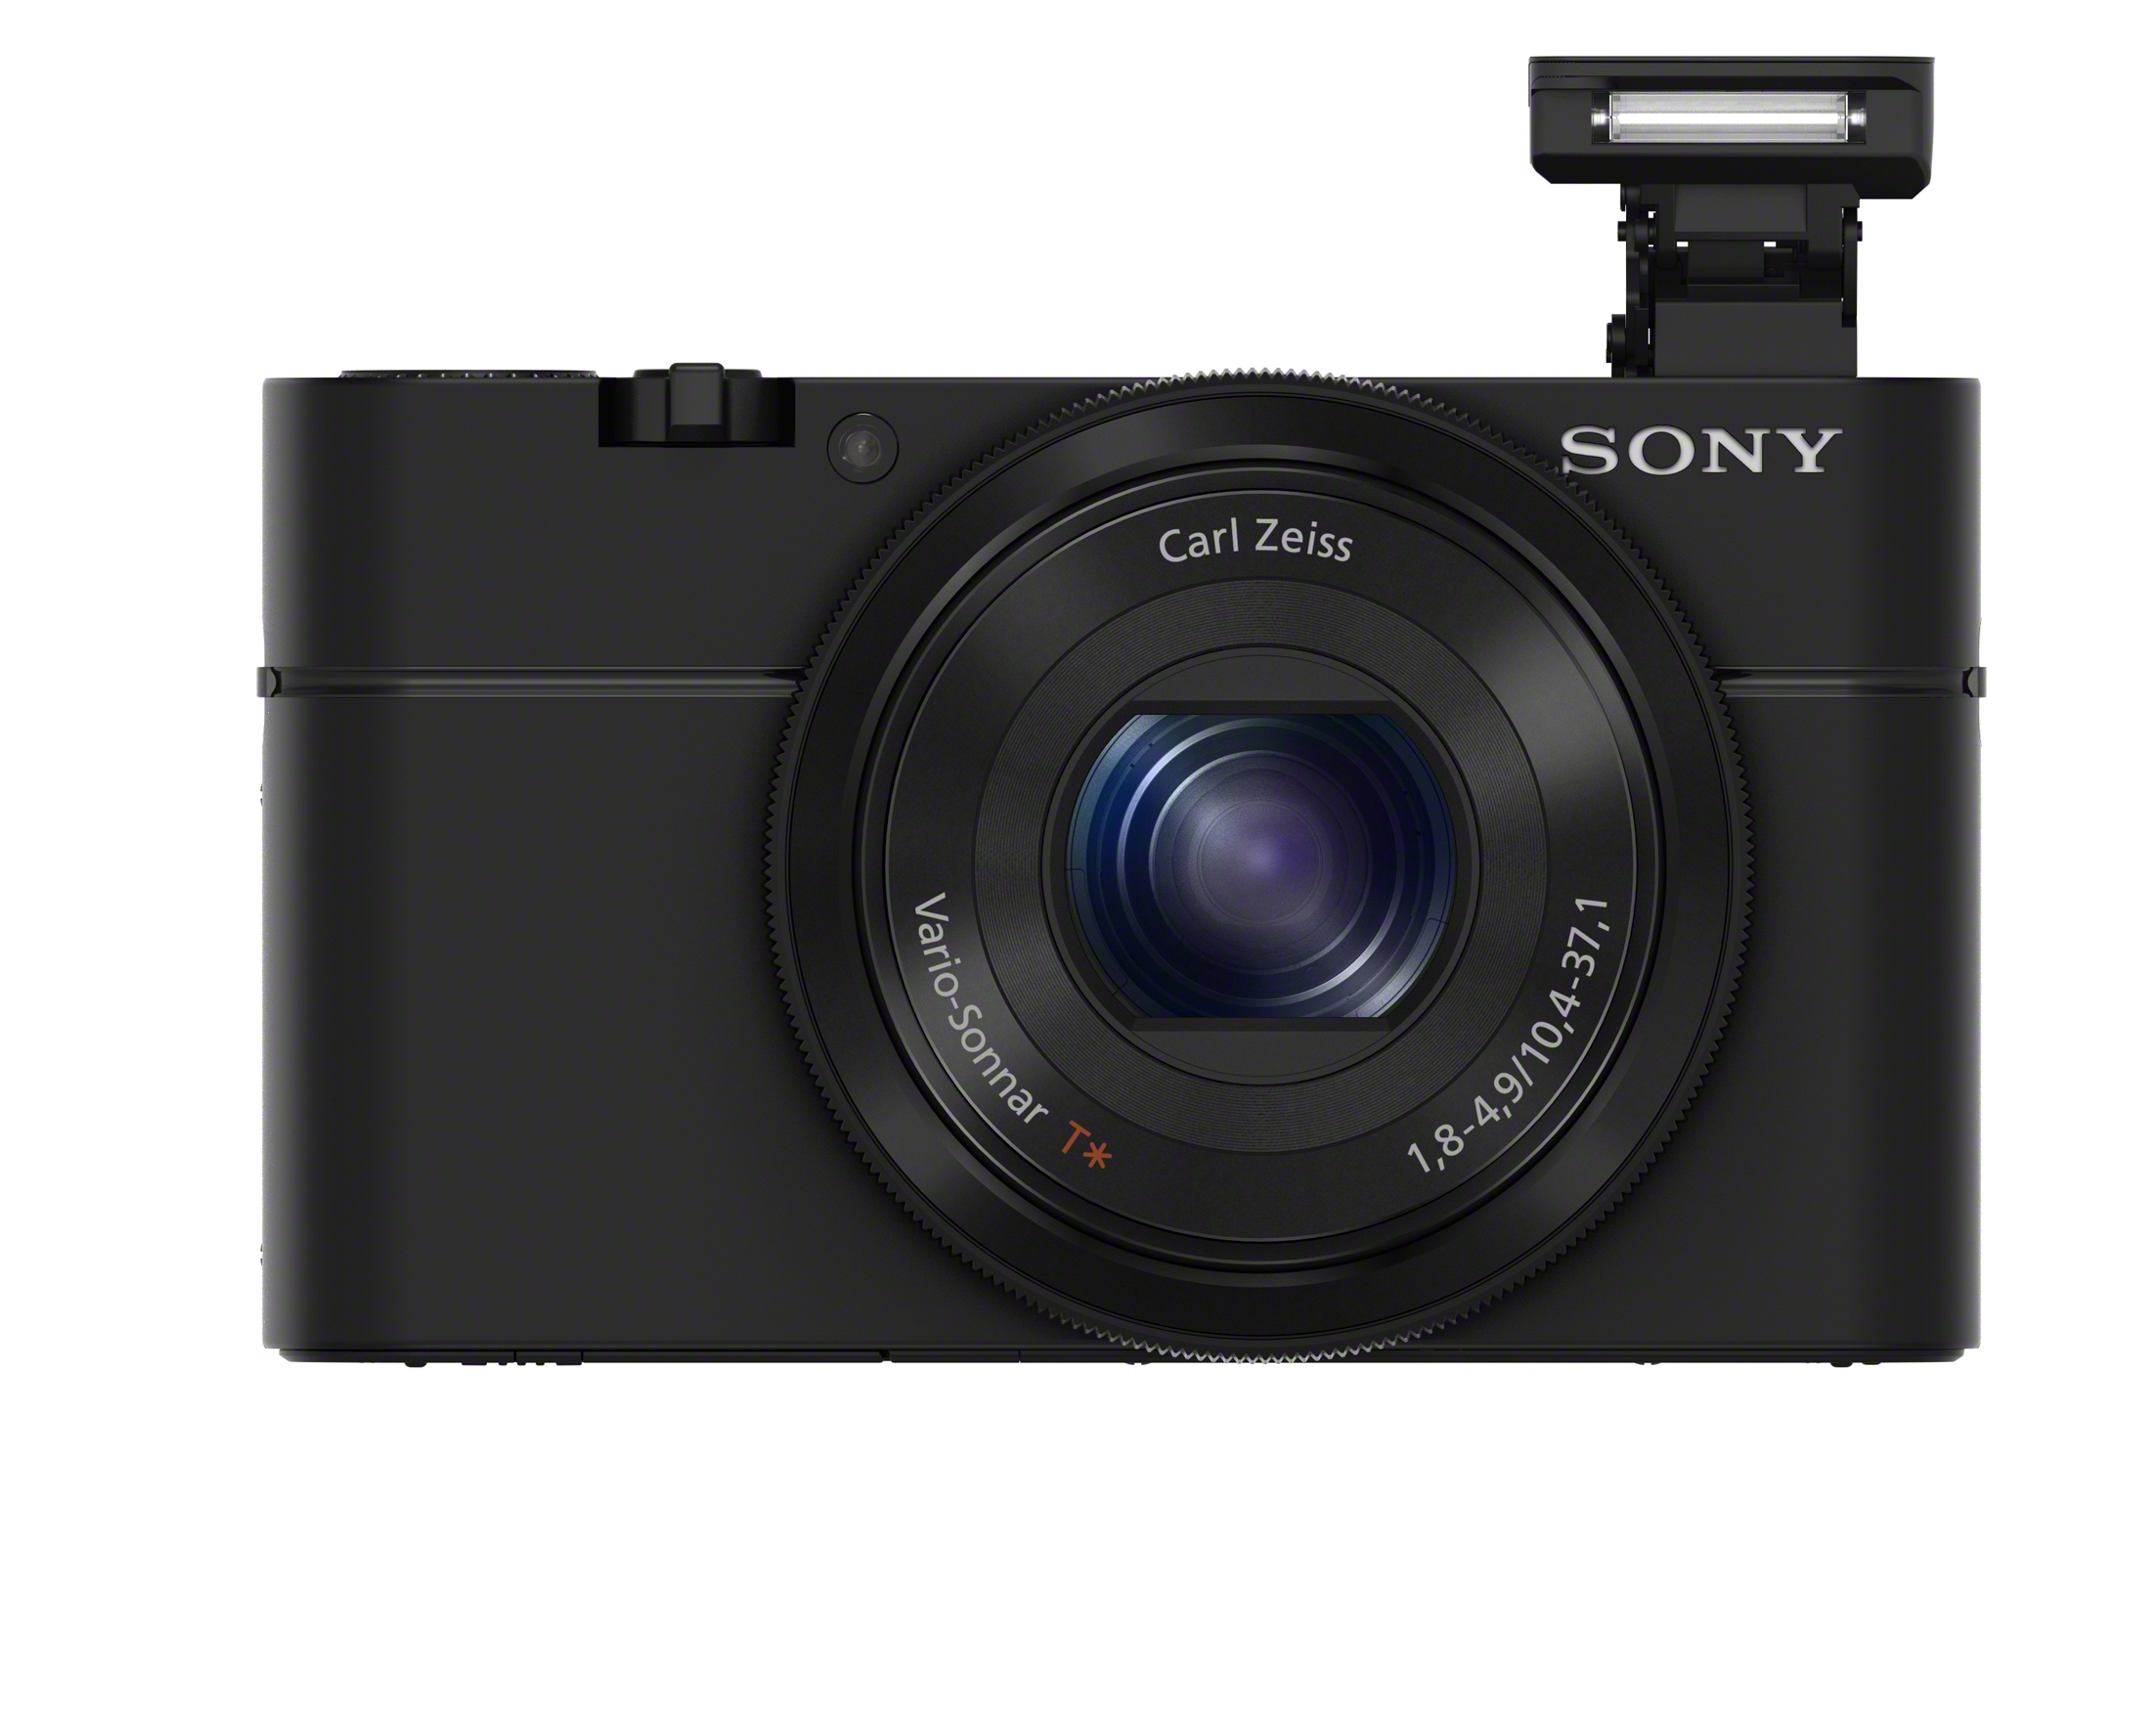 Sony Announced the DSC-RX100 Professional Compact Camera